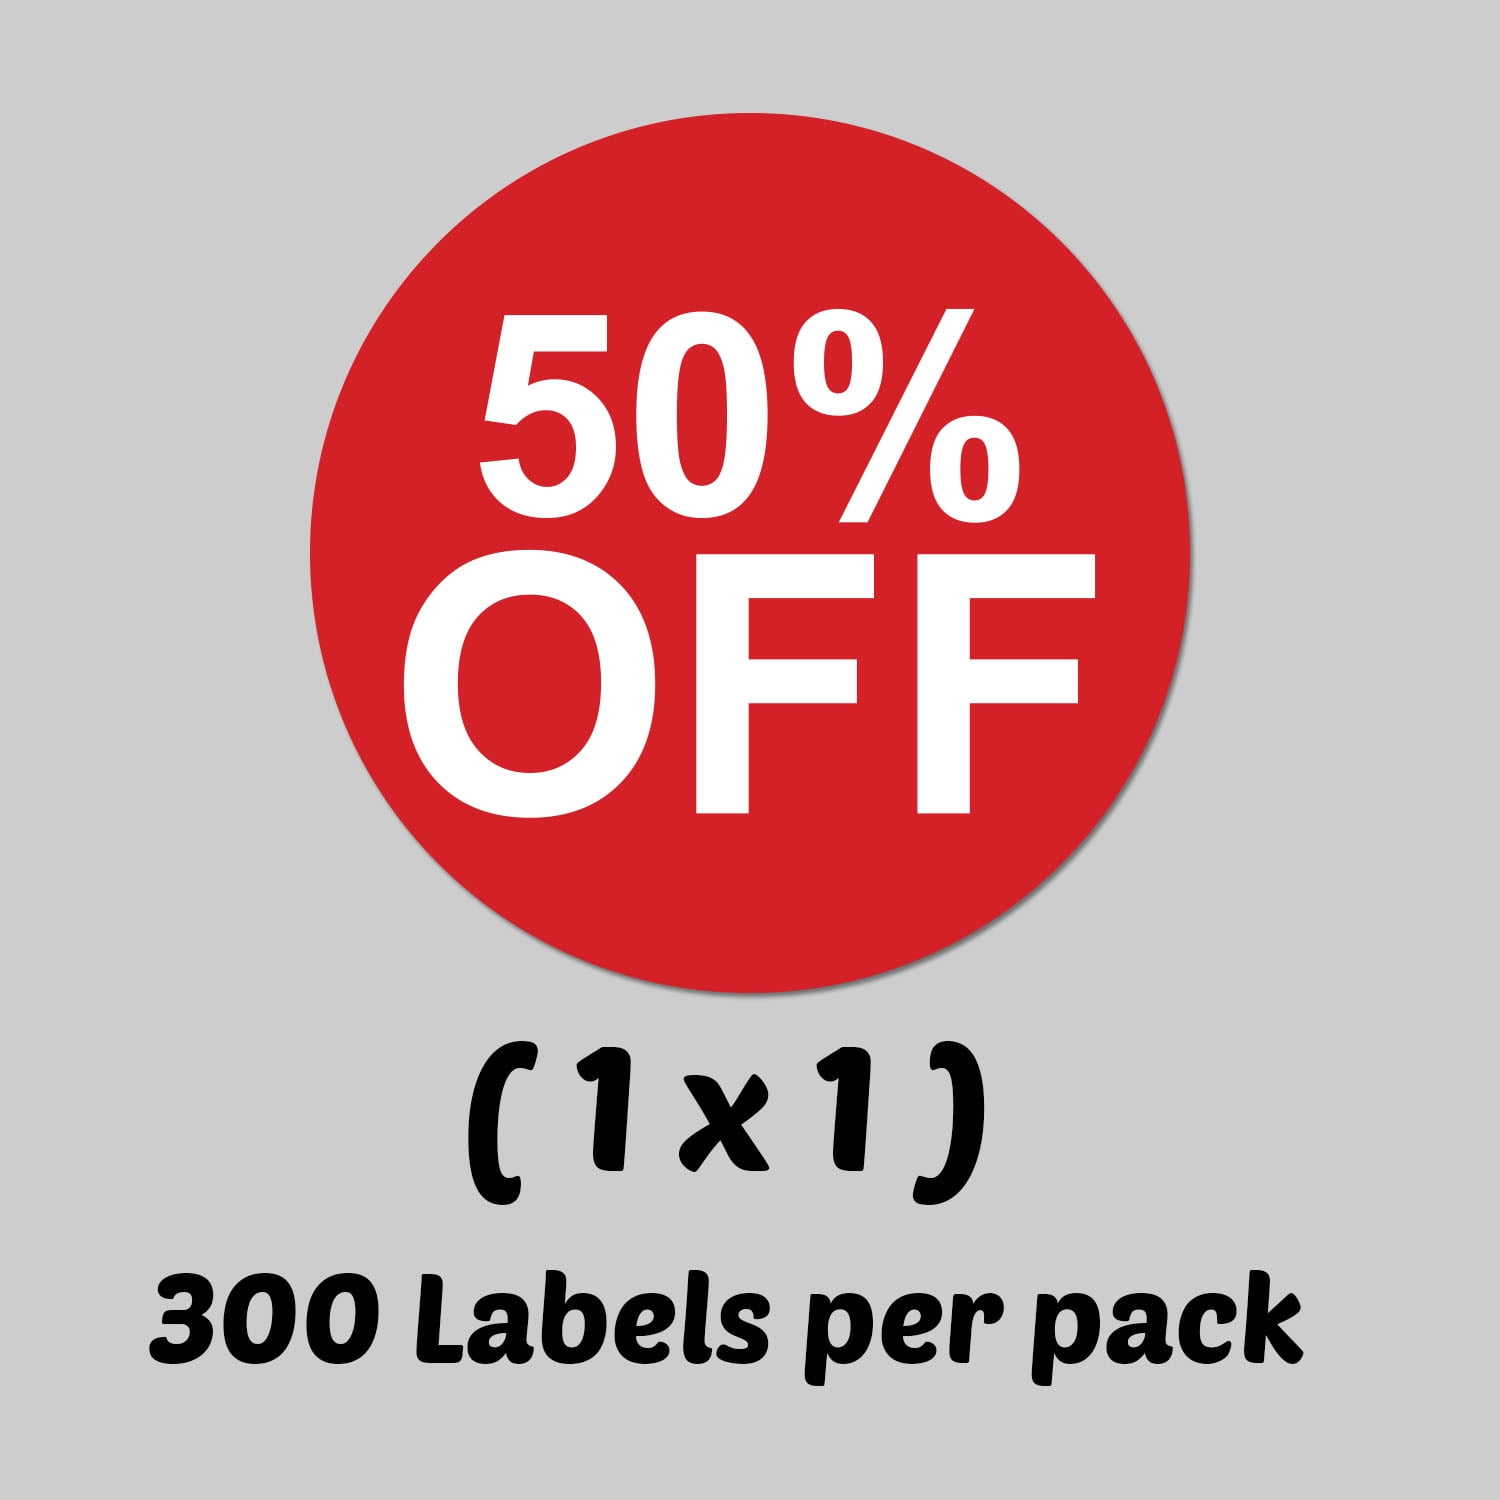 1260 Pcs 3/4 Inch Percent Off Stickers for Retail Store Clearance Promotion Discount Deals Circle Pricemarker 10% 25% 50% Off Sale Price Stickers Labels Half Off Labels Stickers 